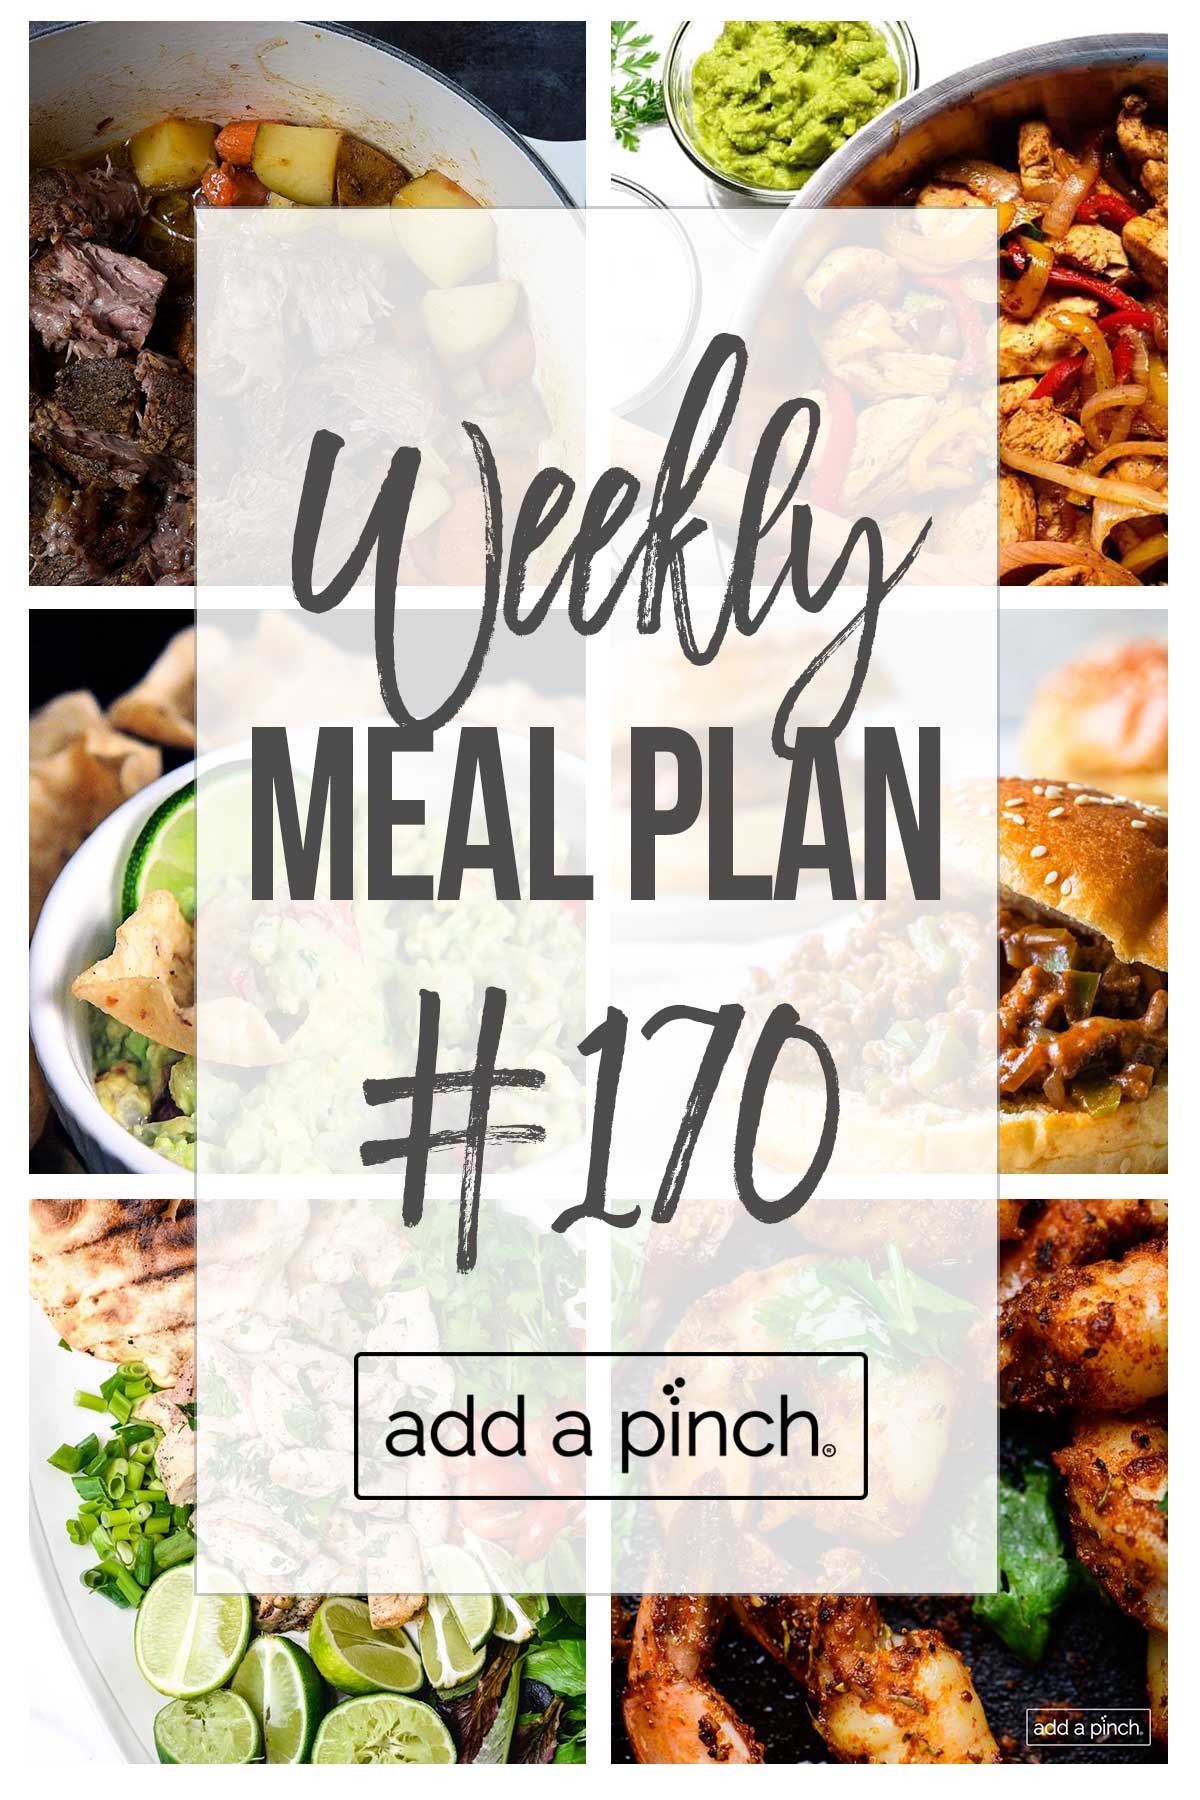 Graphic for free weekly meal plan #170 on addapinch.com